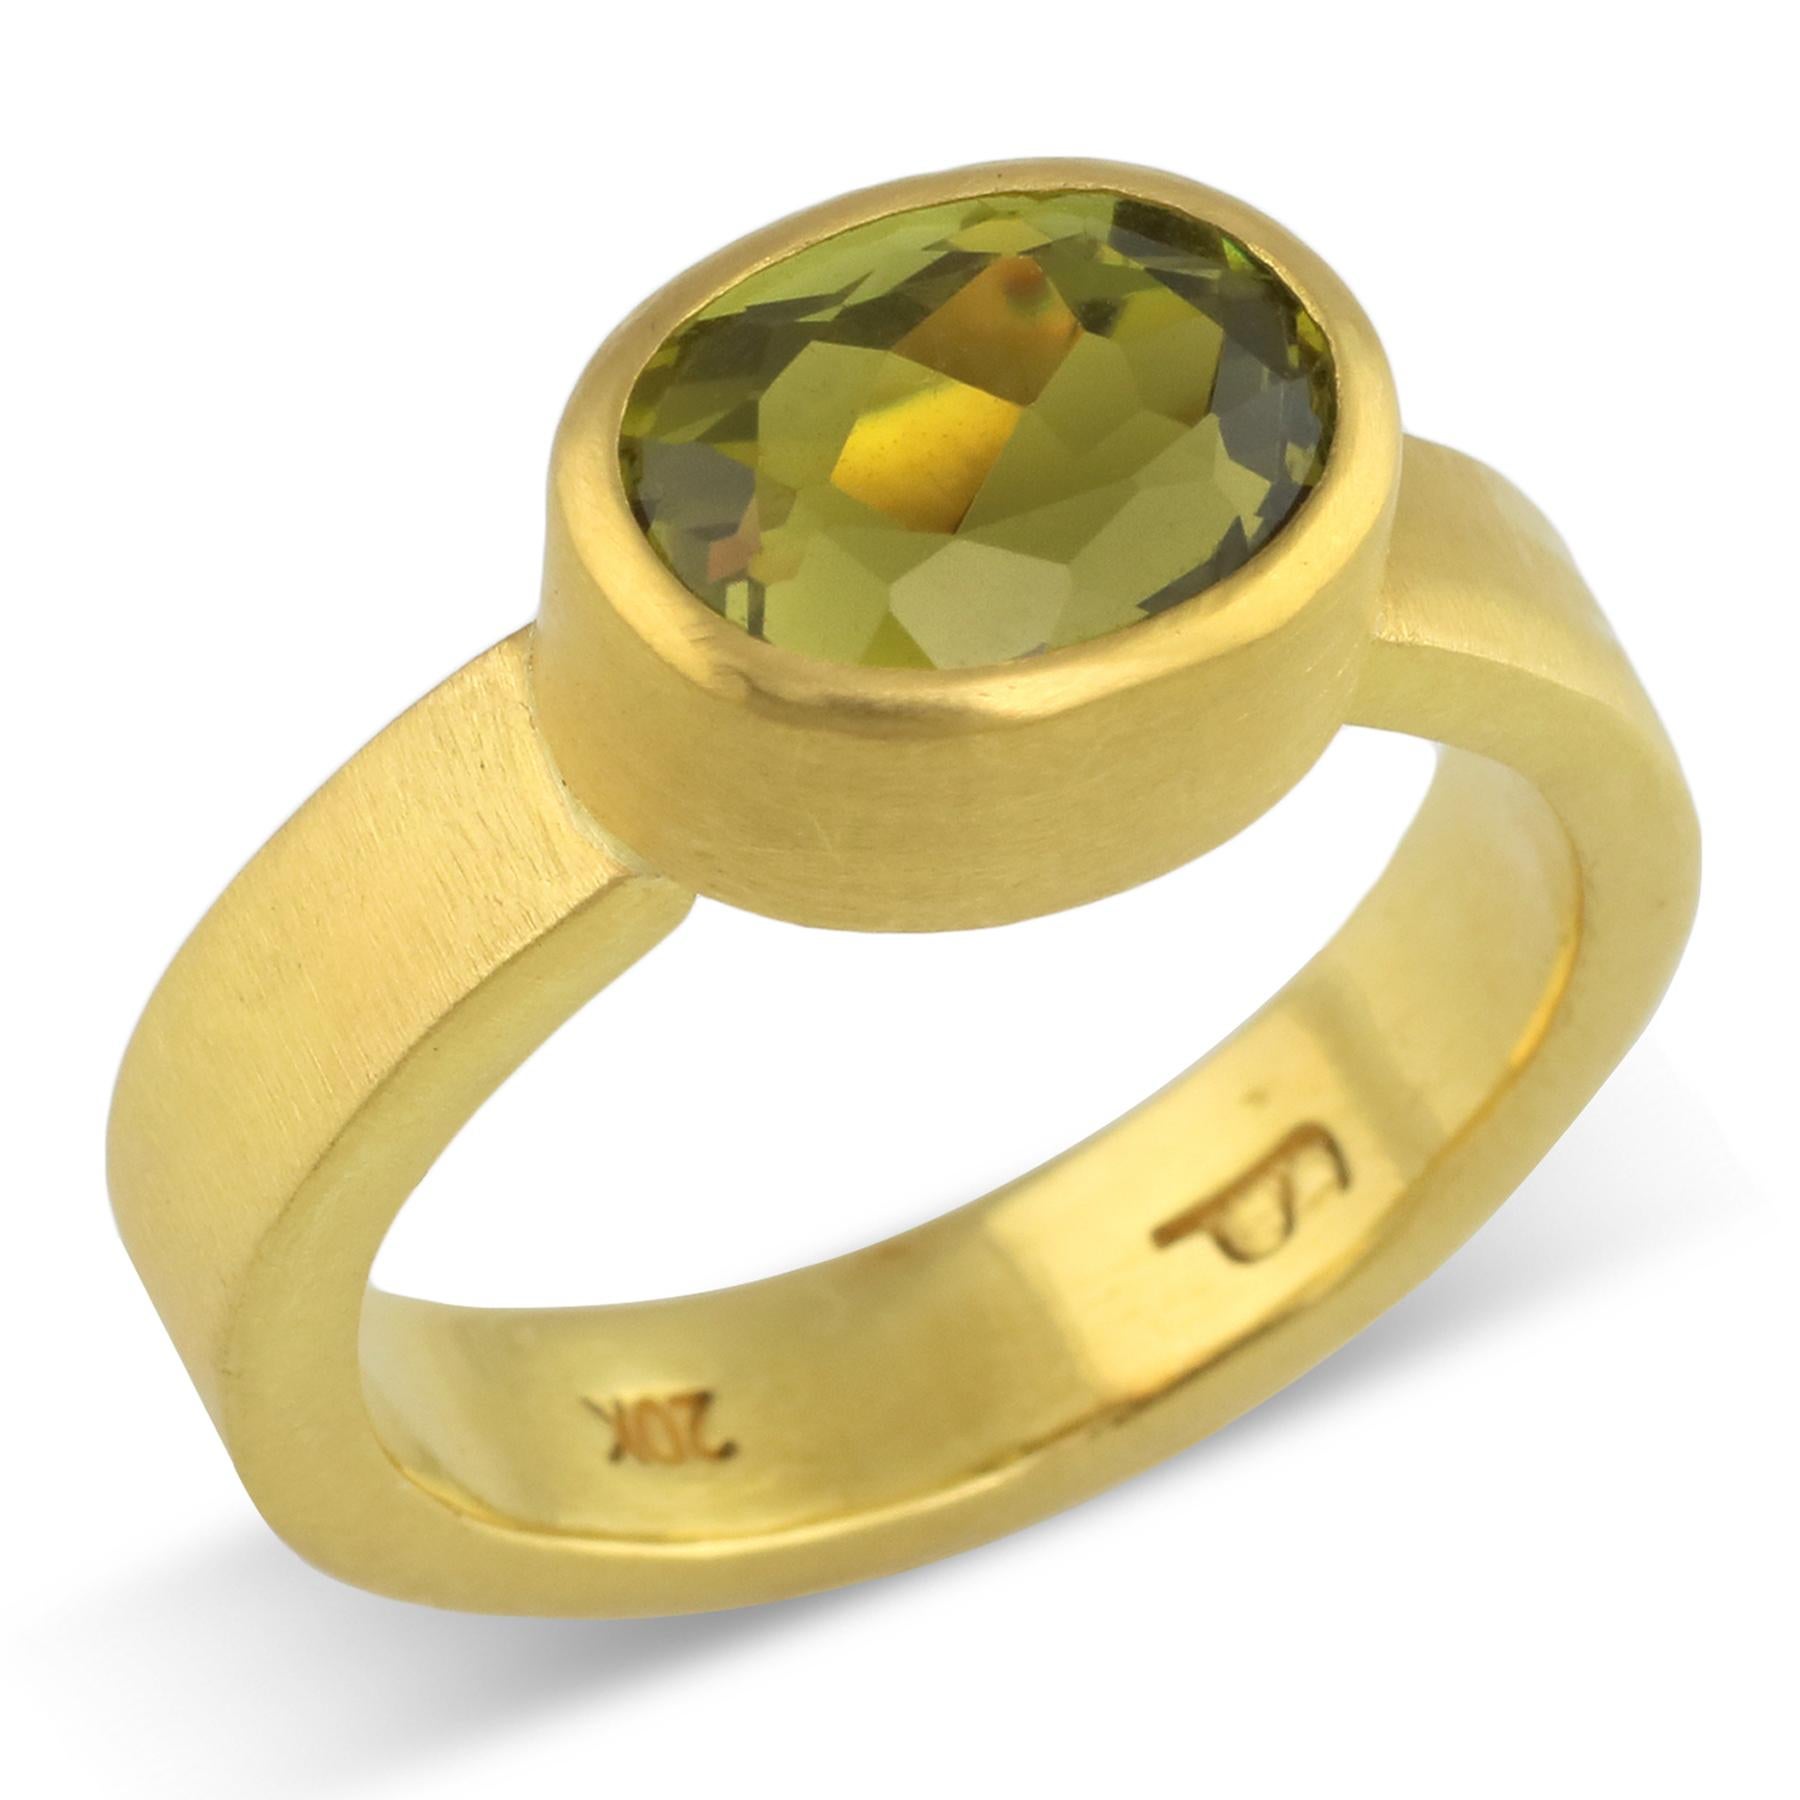 Artisan PHILIPPE SPENCER 2.53 Ct. Tourmaline in 22K and 20K Gold Statement Ring For Sale